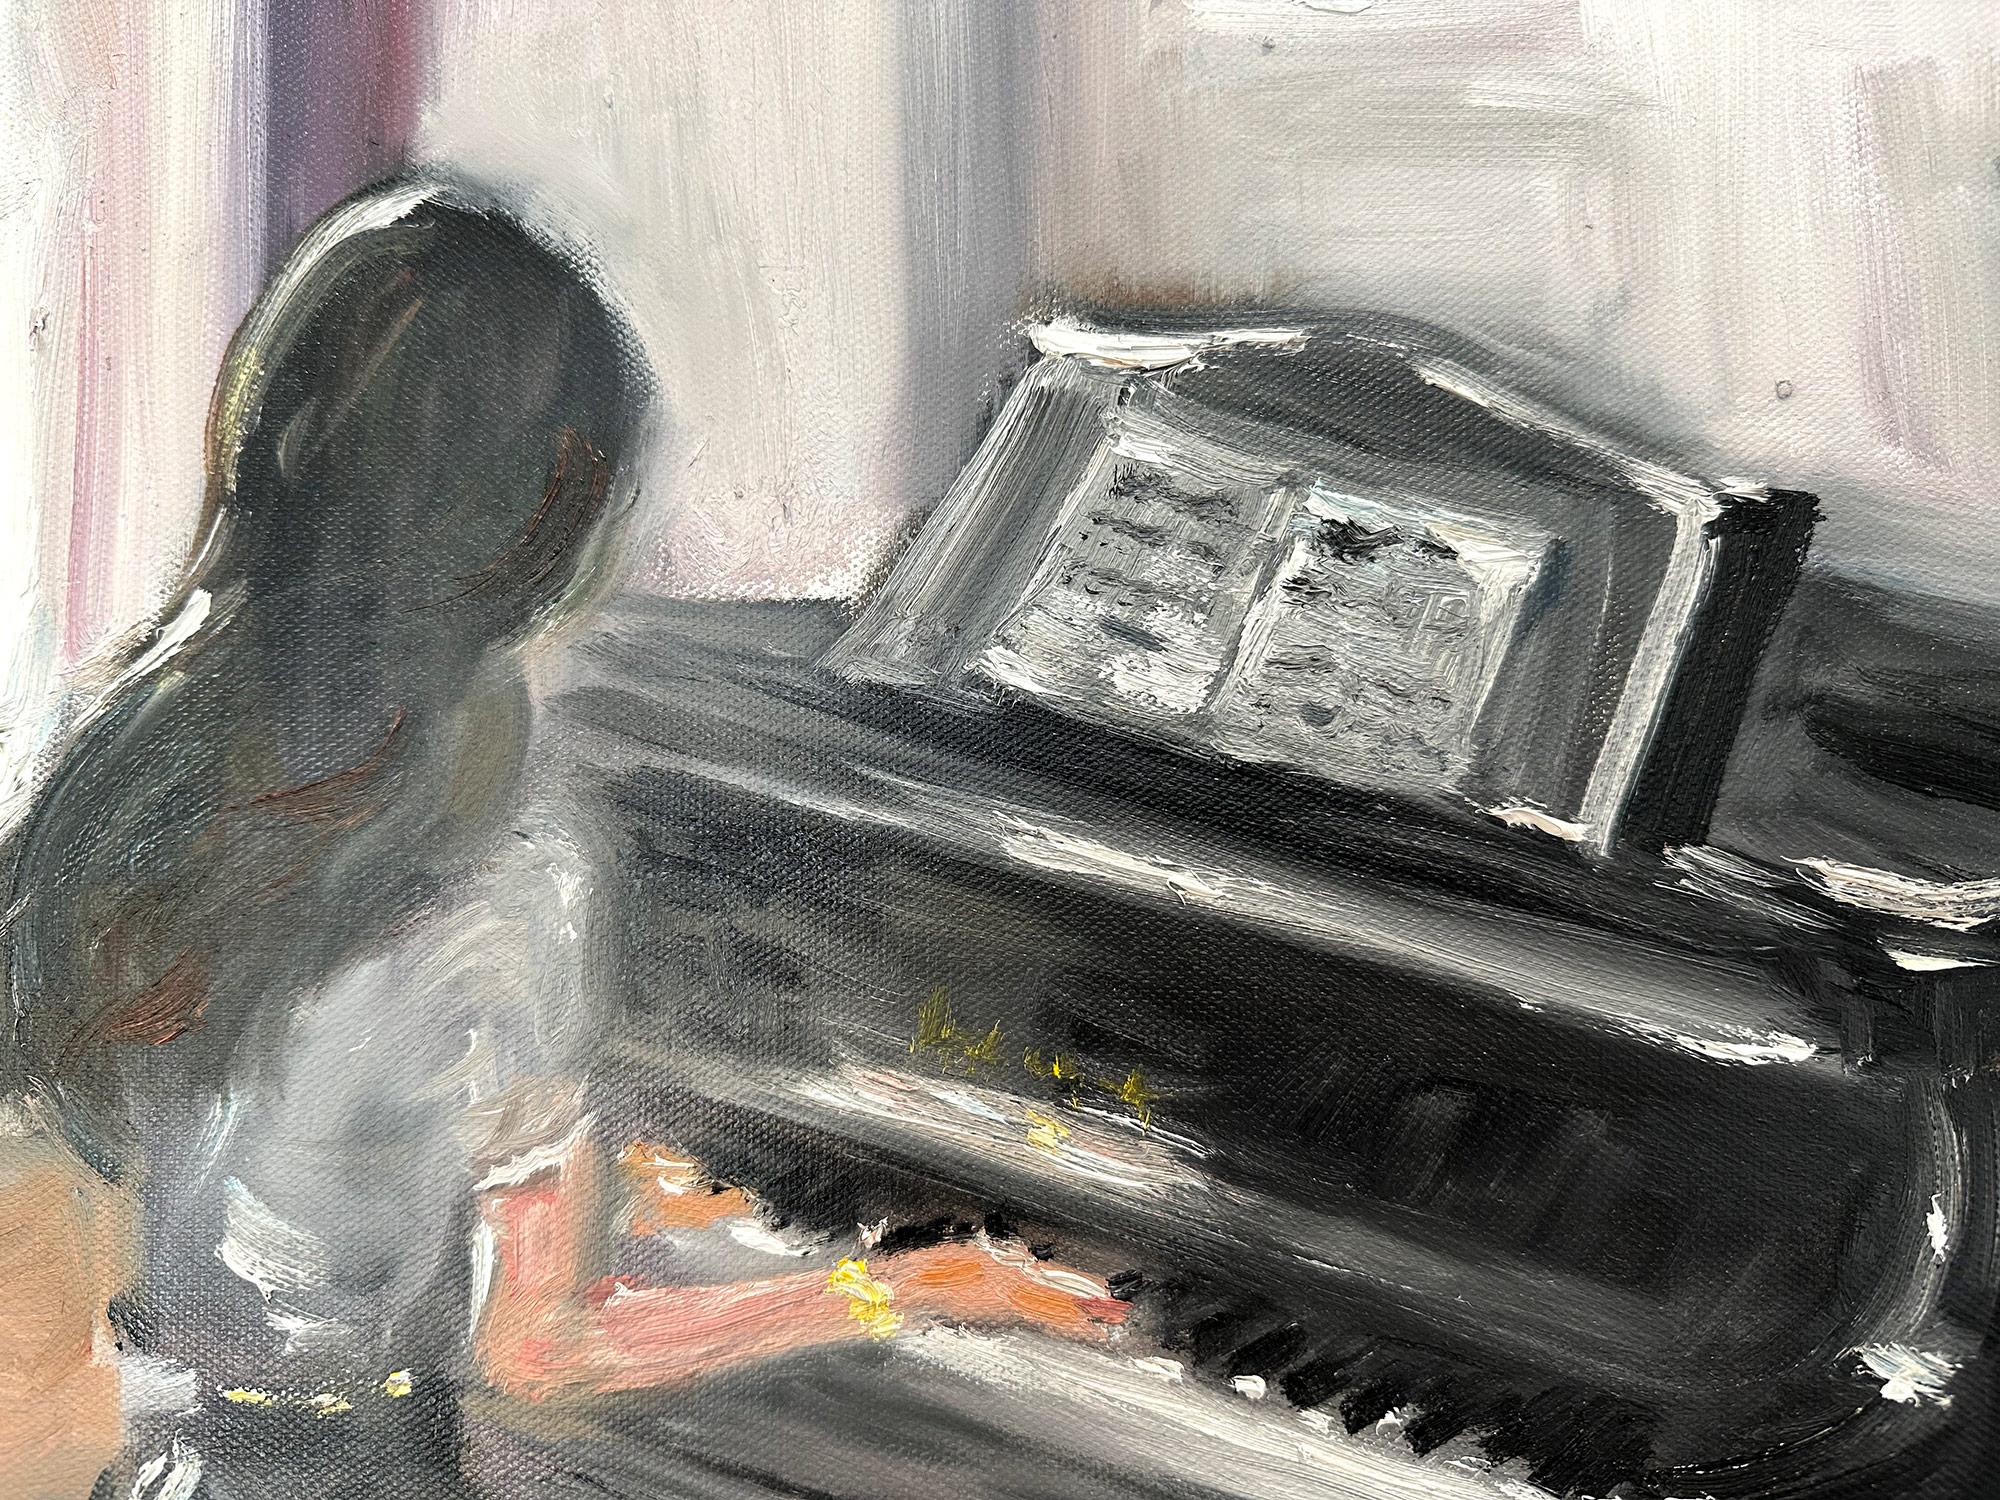 A charming depiction of an interior scene with a woman playing the piano passionately. A cozy impressionistic scene with warmth and feeling. Whimsical details through out and beautiful brushwork. This piece captures the essence of a Parisian room